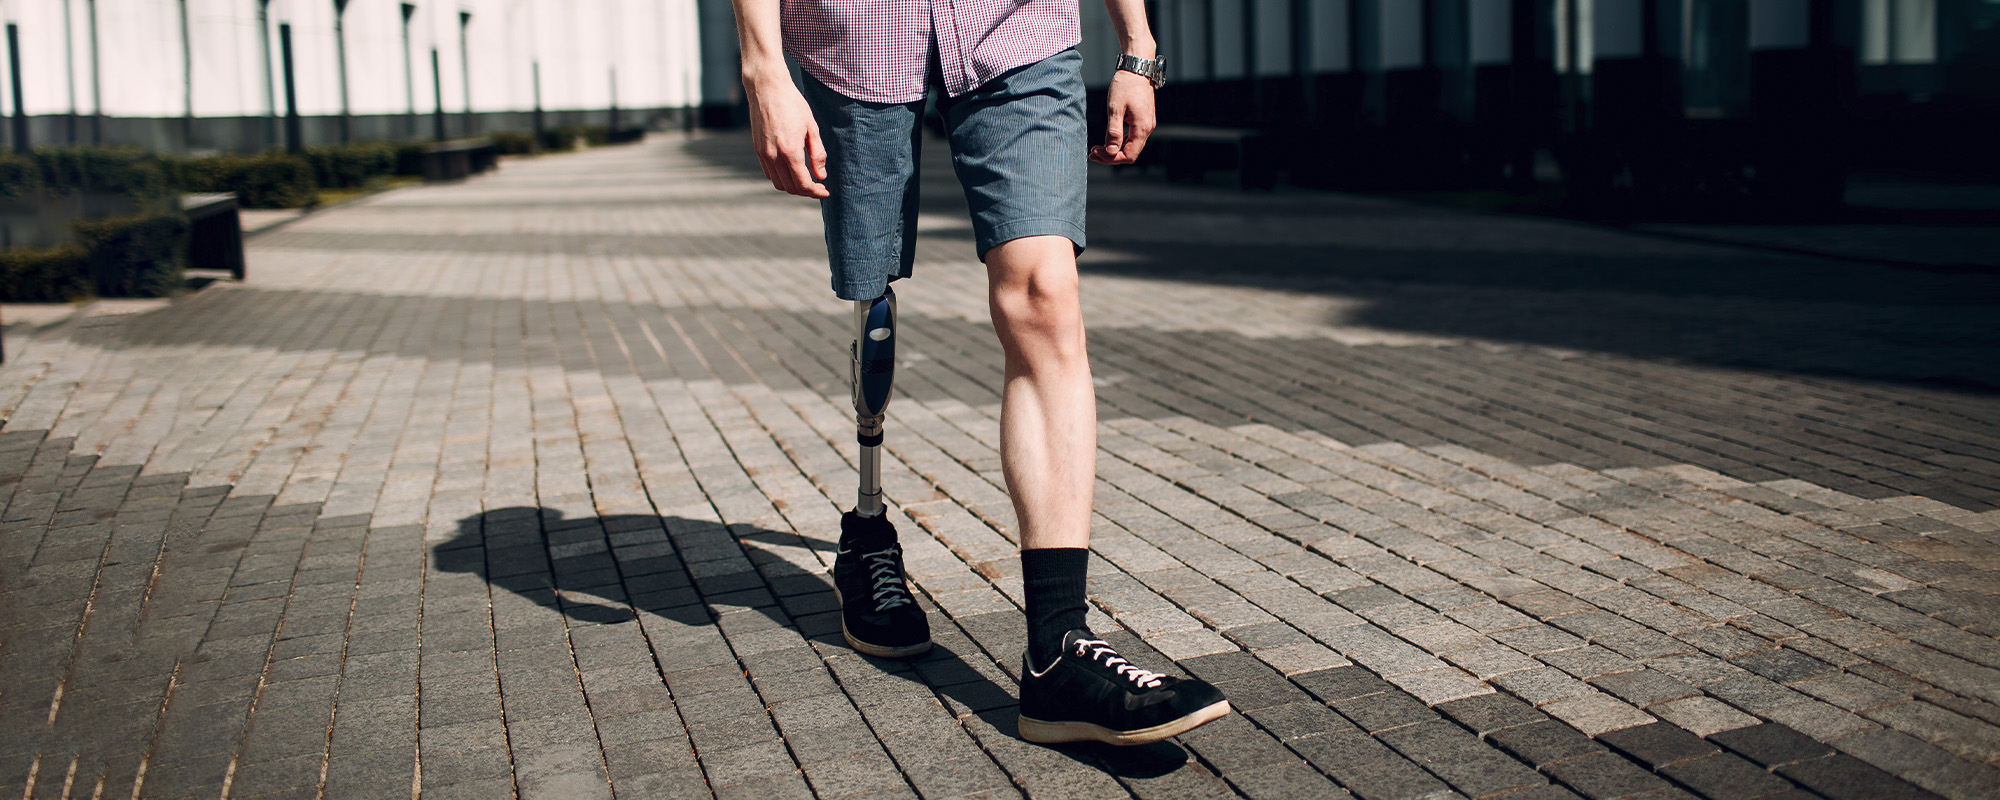 disabled young man with foot prosthesis walks along the street.